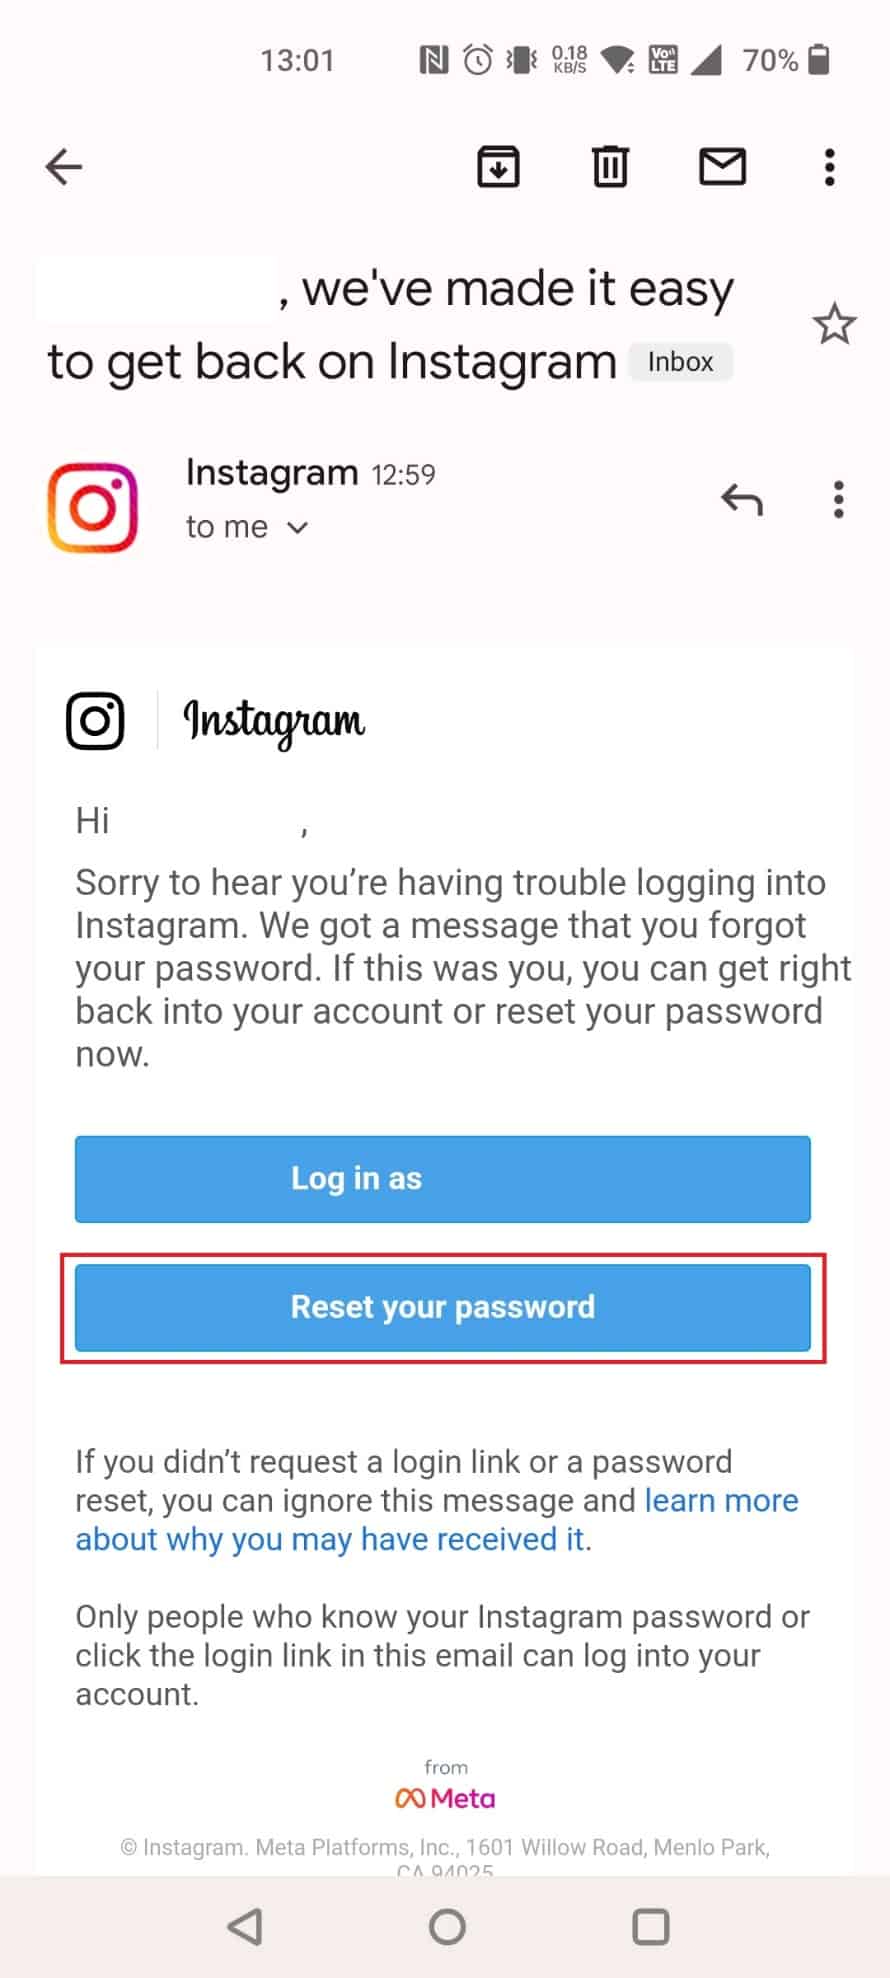 Open the mail sent from Instagram and tap on Reset your password